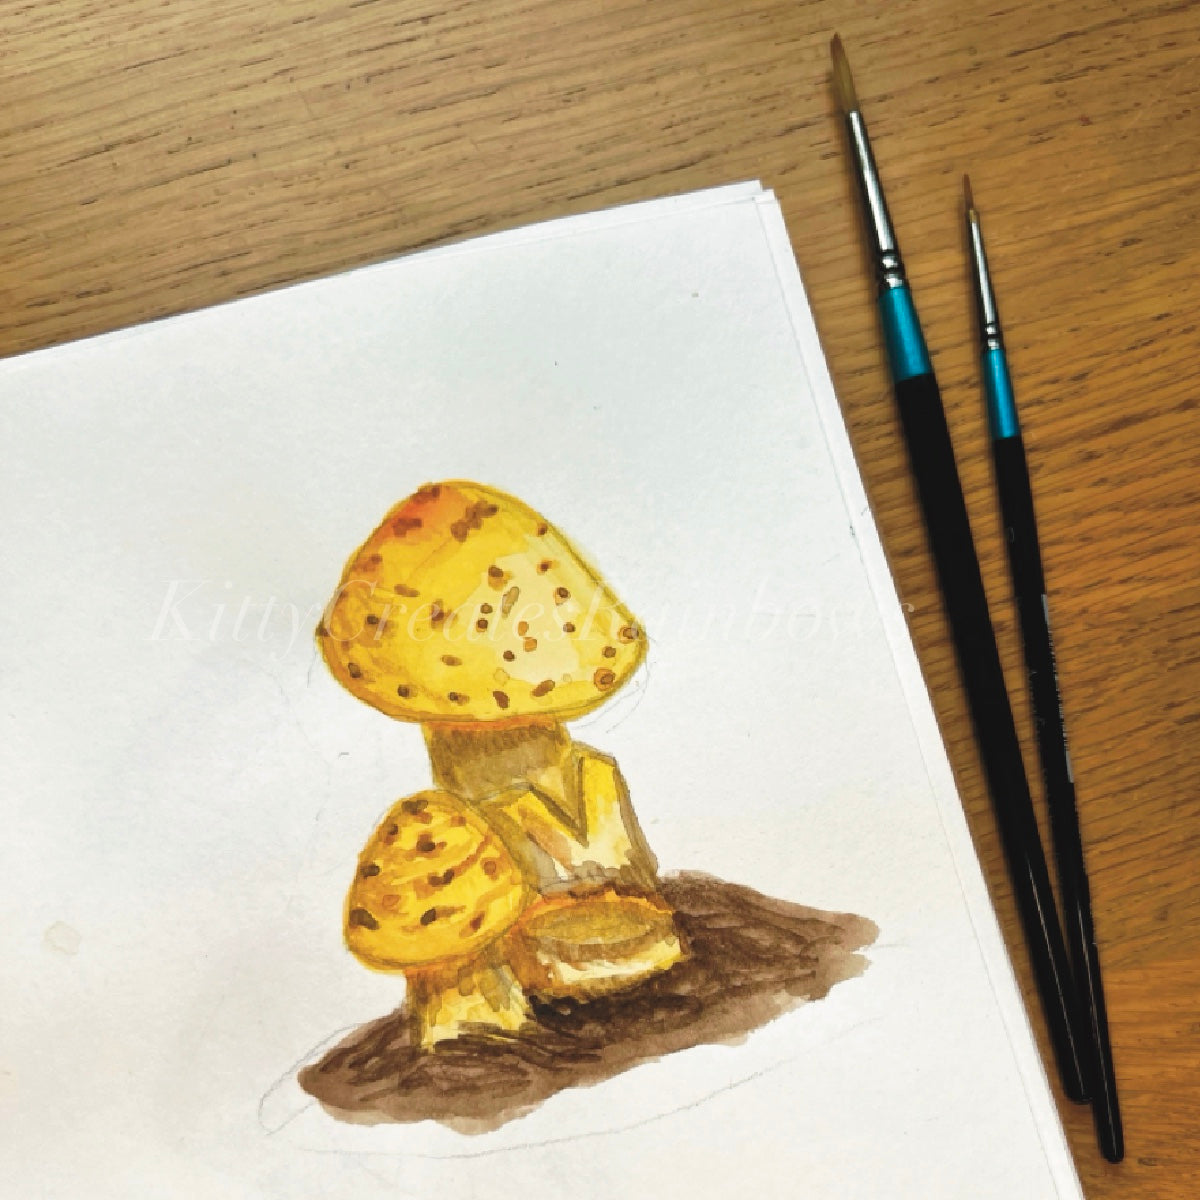 Yellow amanita watercolour original painting by Kat Lovatt on a wooden desk with 2 paintbrushes laying next to the sketchbook